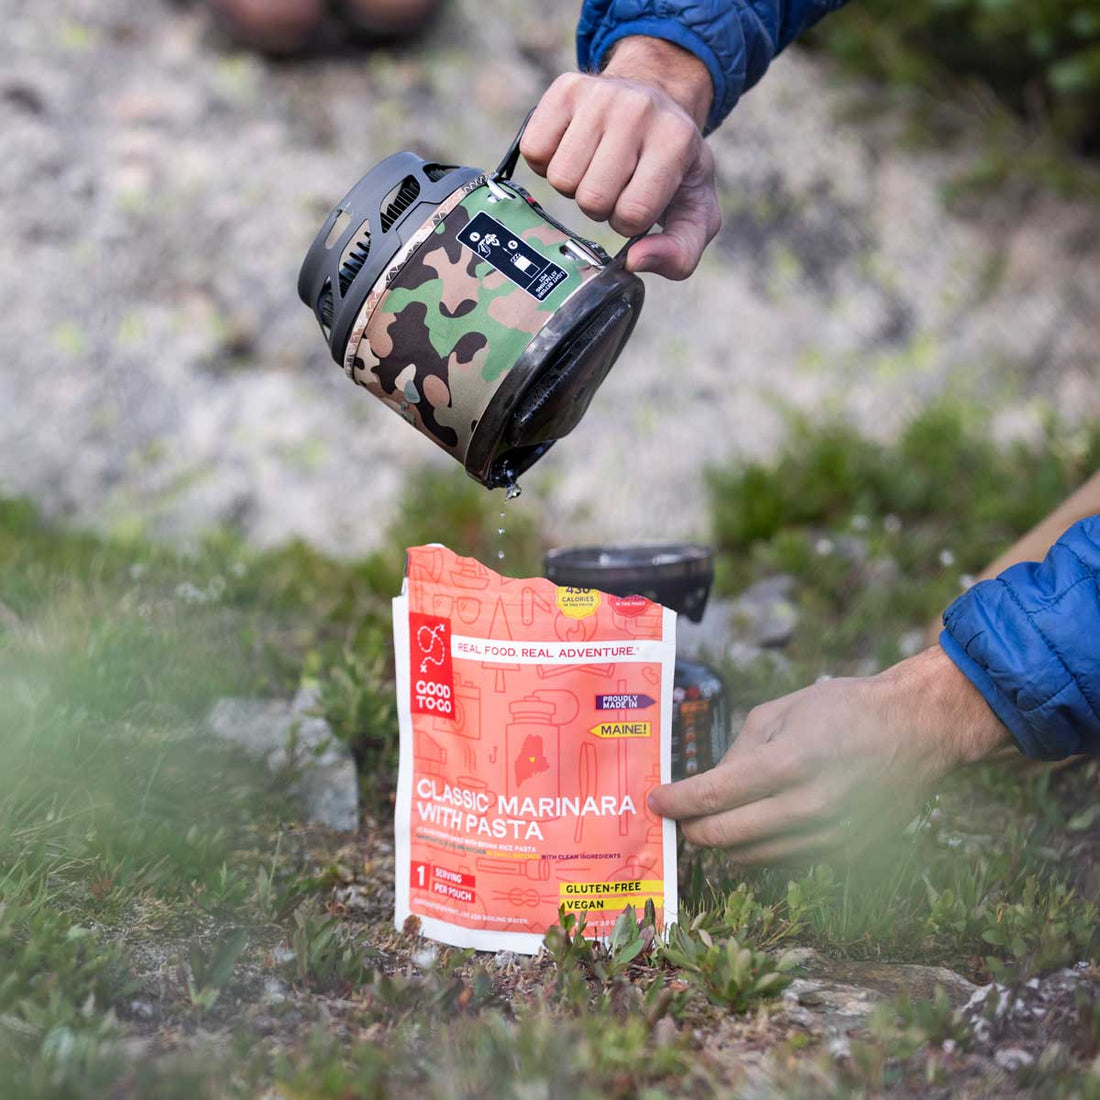 Supplies - Provisions - Eating Tools - Jetboil MiniMo Cooking System - Camo